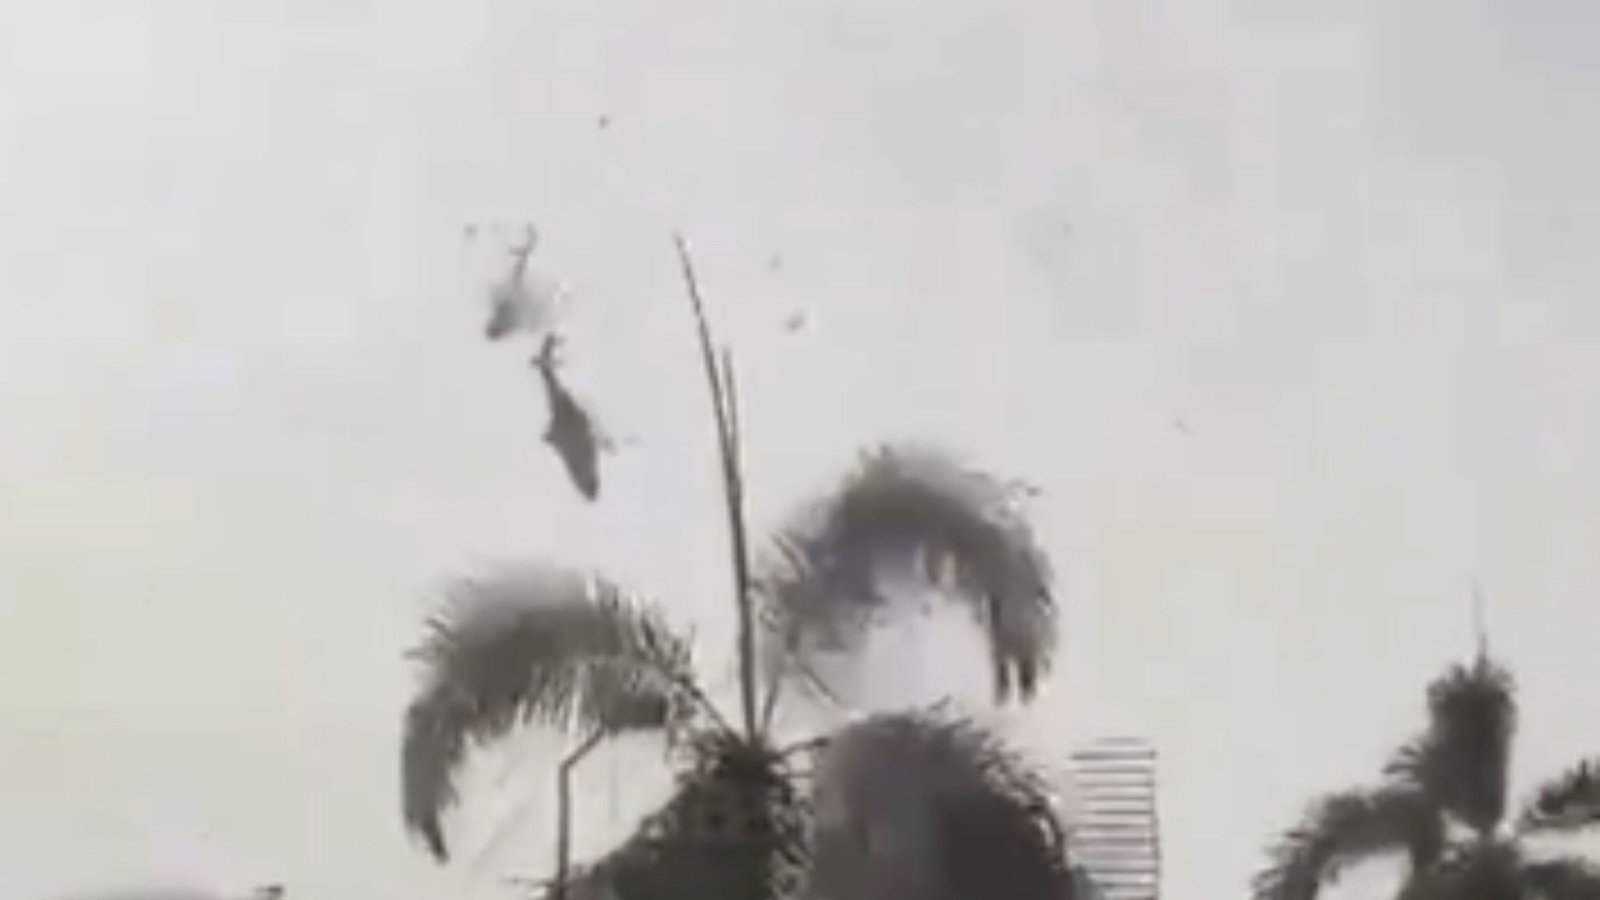 Shocking moment military helicopters crash mid-air sending them hurtling to ground & killing all 10 onboard in Malaysia